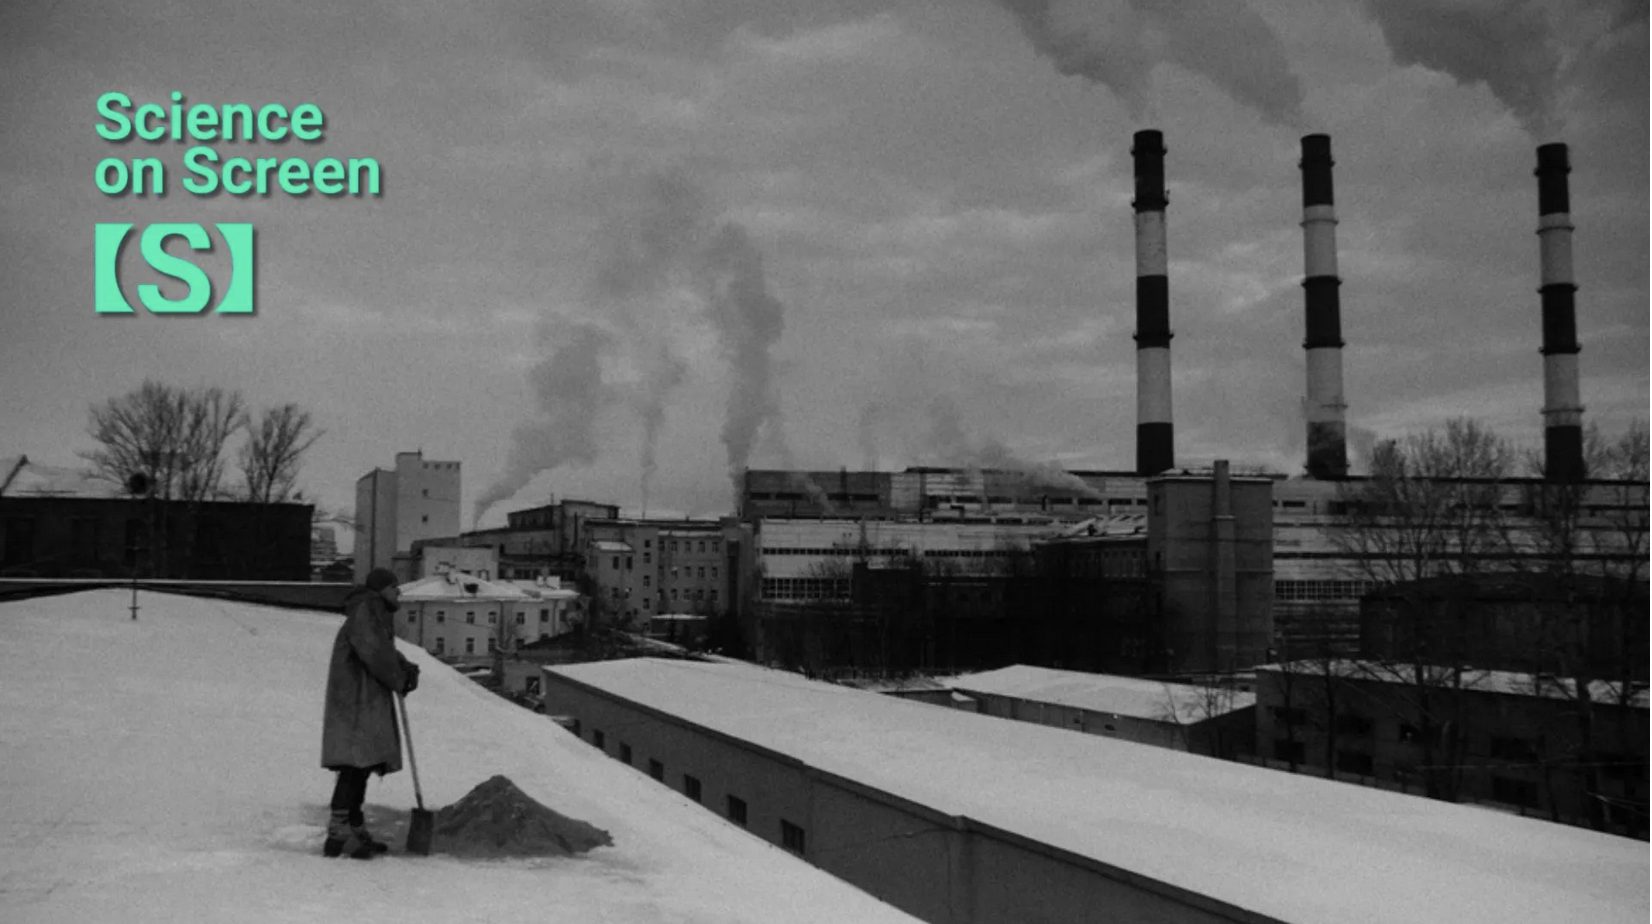 Black and white image of man with shovel standing on rooftop, with large smokestacks in background against cloudy sky